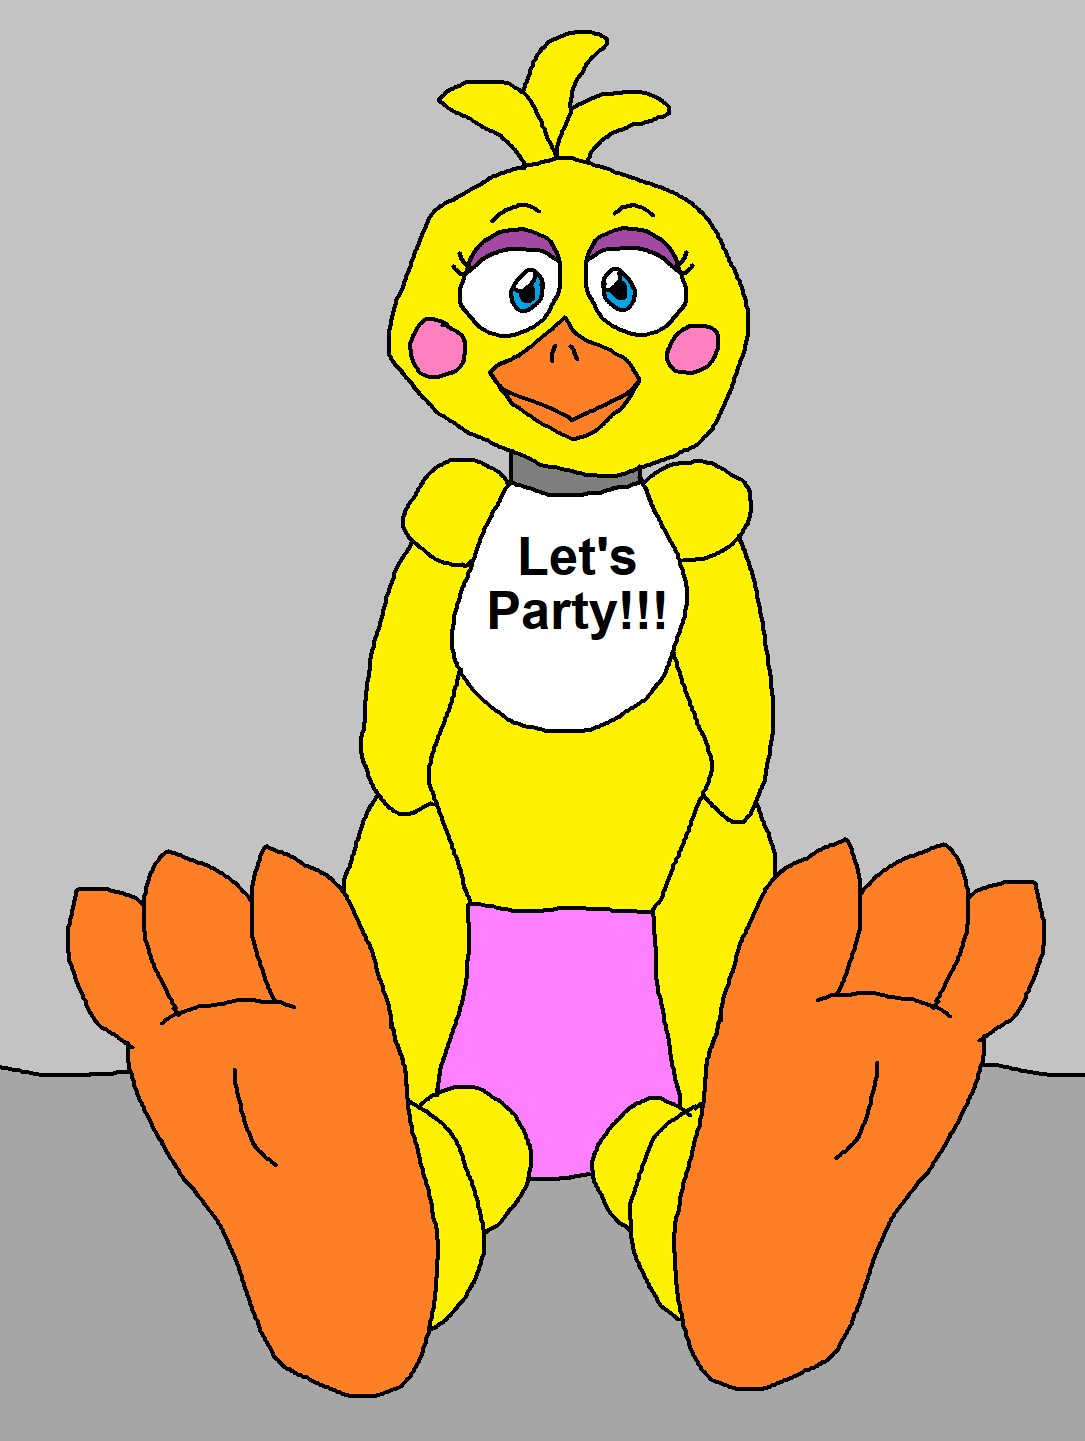 Toy Chica's Feet Tease. 